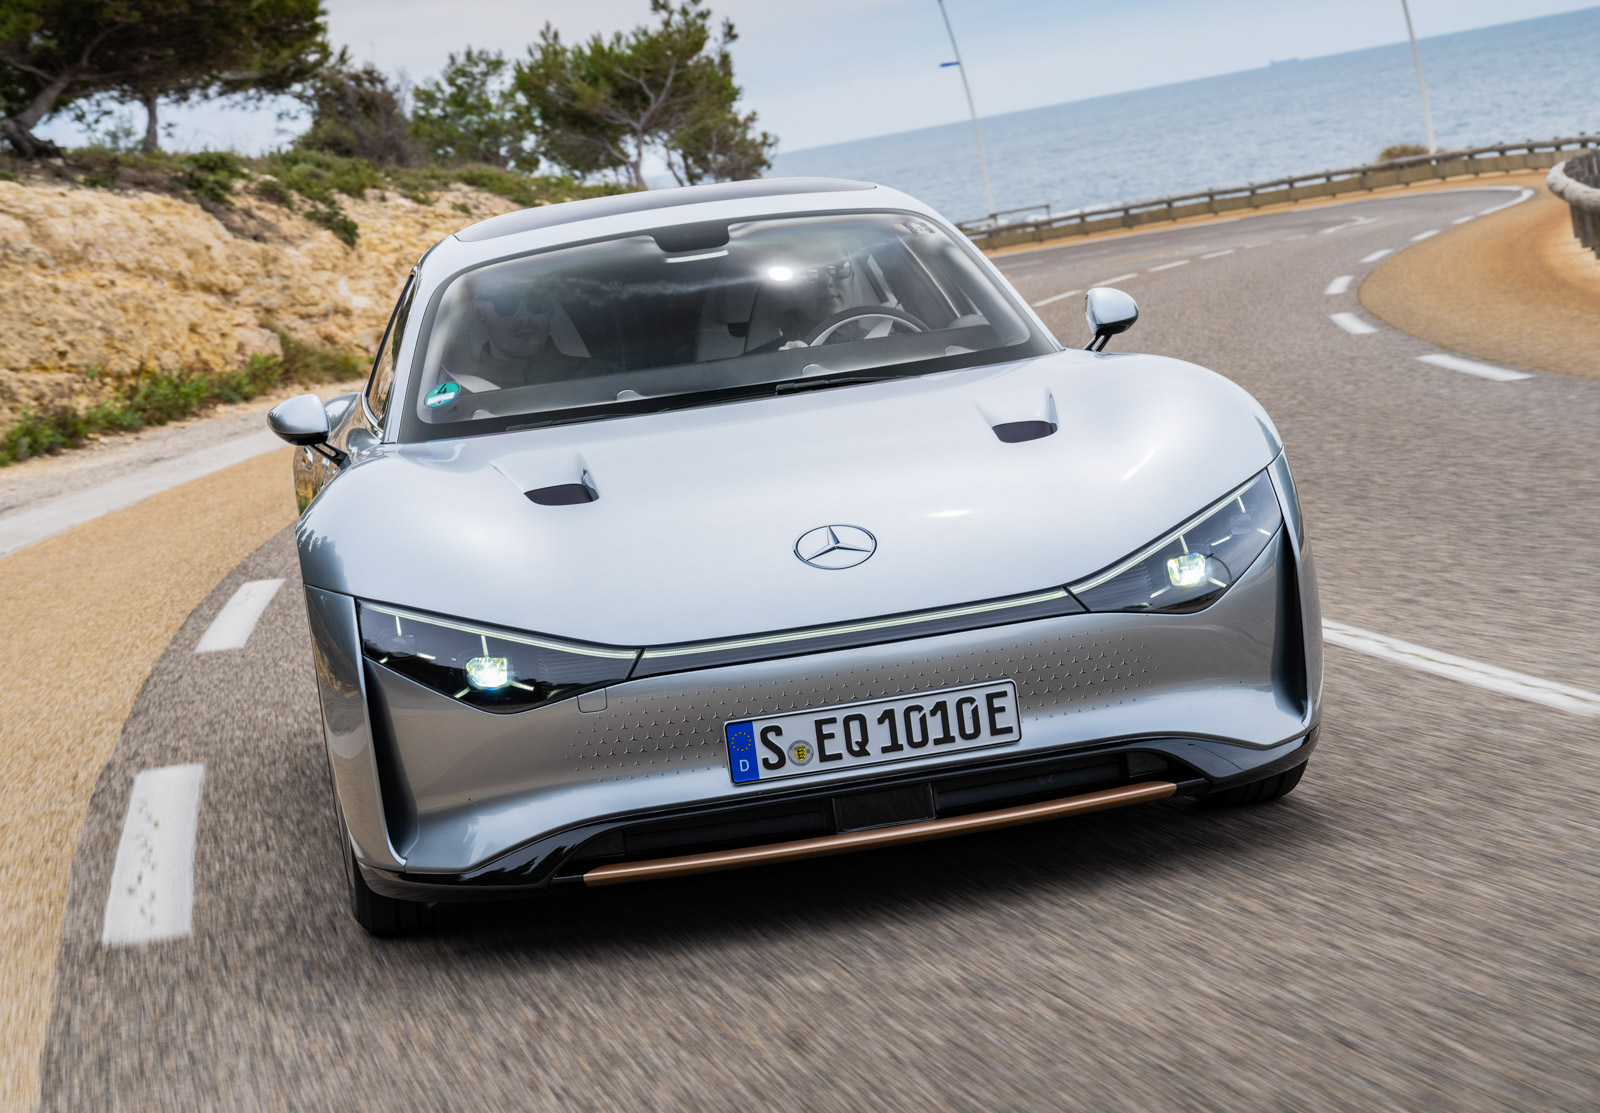 Mercedes BenzVision EQXX ride along review 20